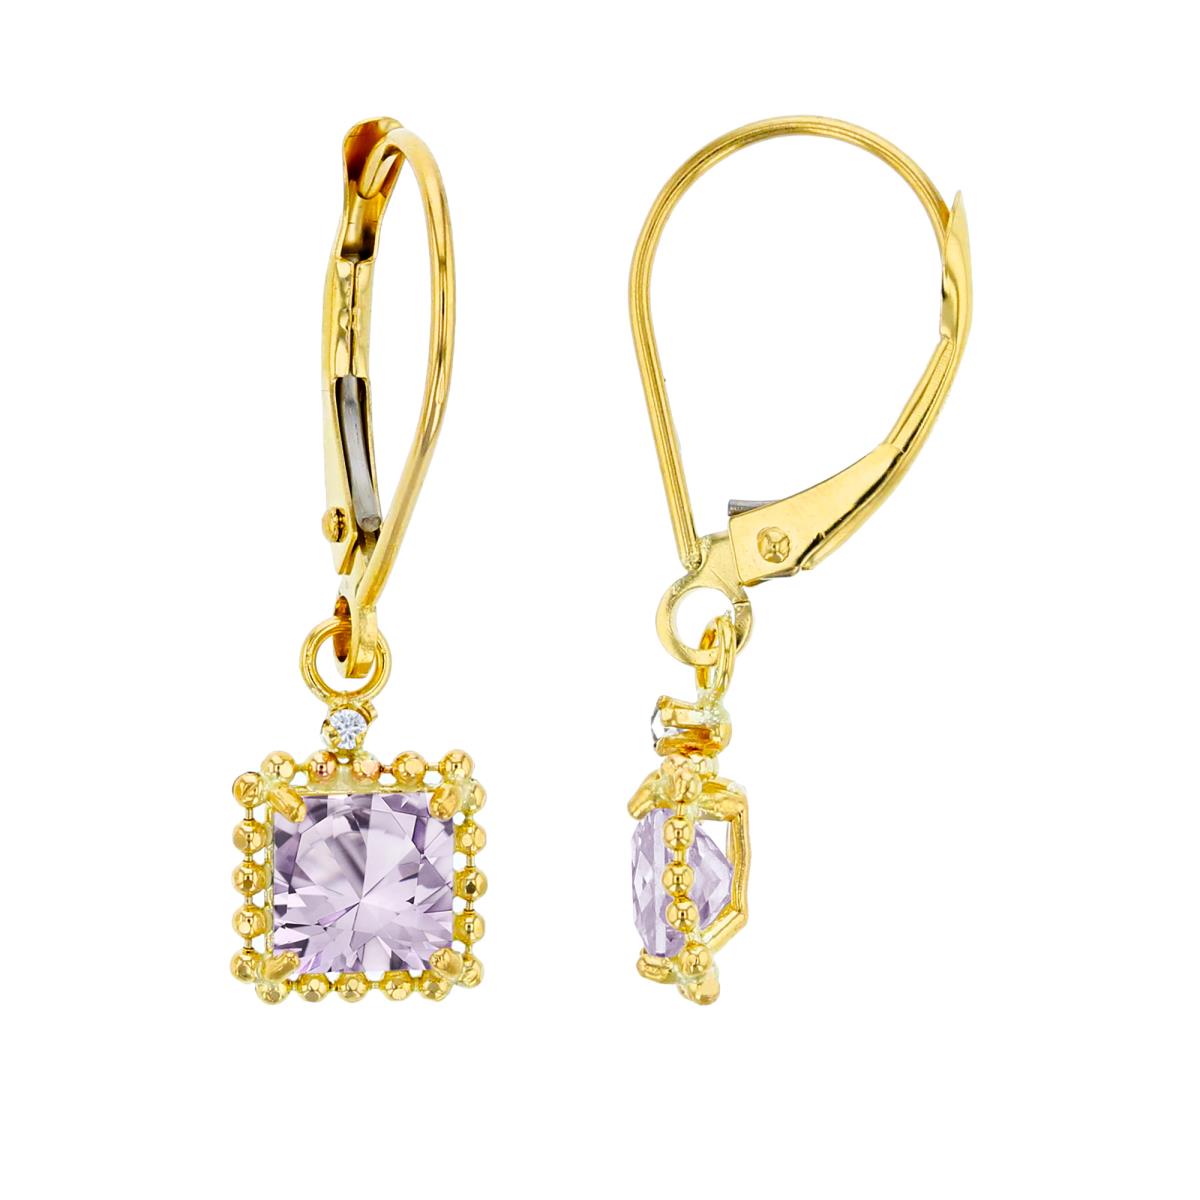 10K Yellow Gold 1.25mm Rd Created White Sapphire & 5mm Sq Rose De France Bead Frame Drop Lever-Back Earring